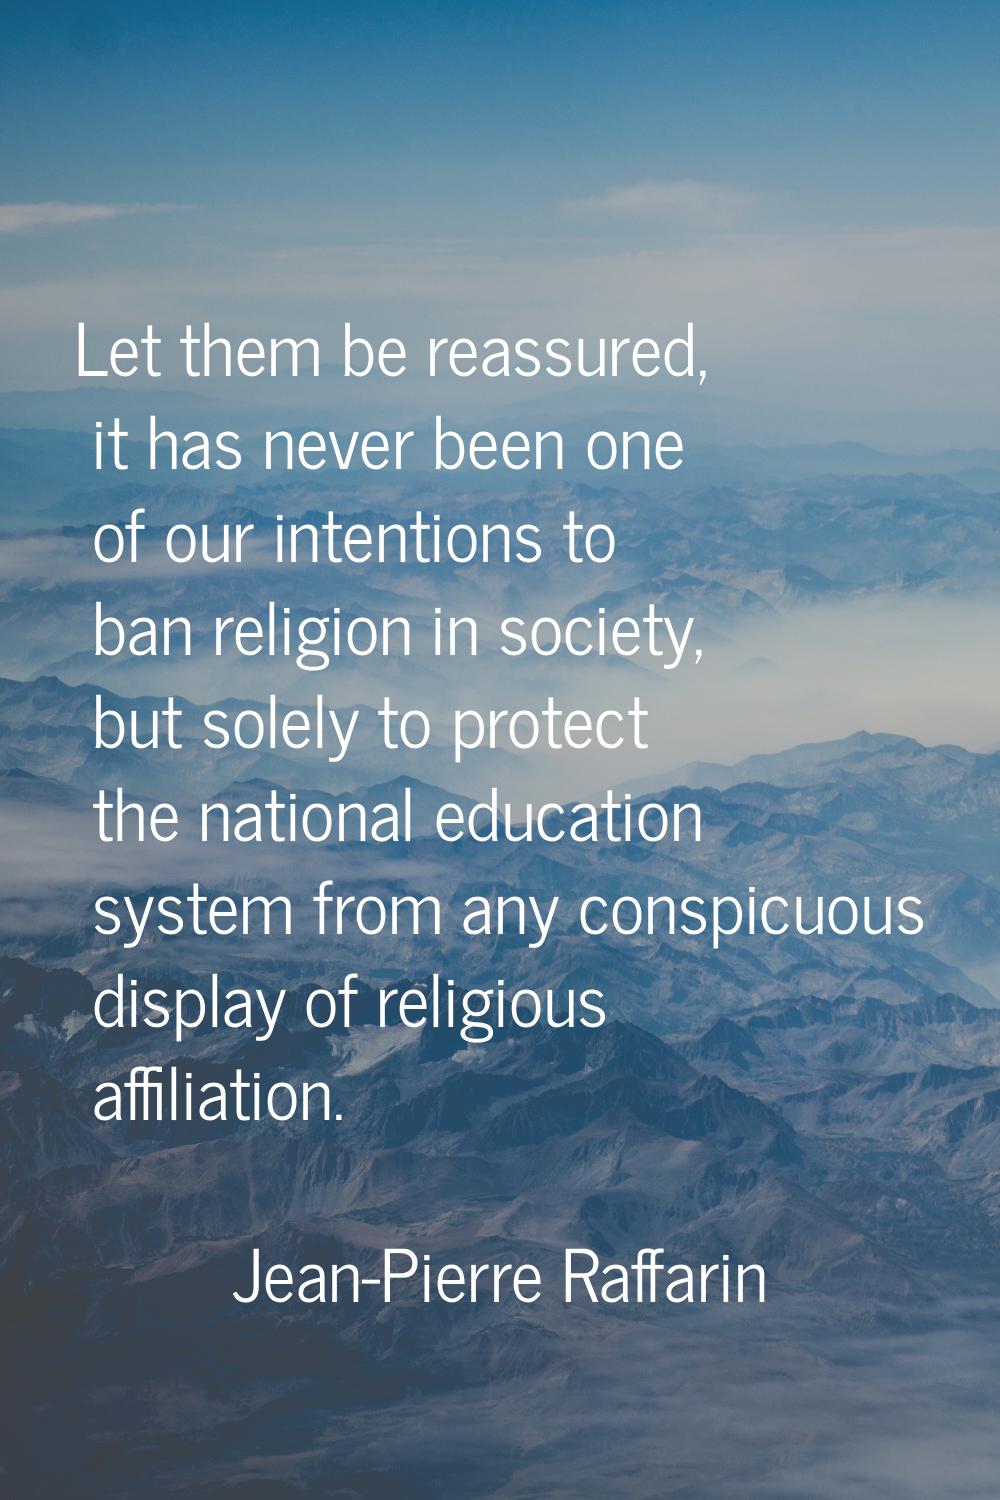 Let them be reassured, it has never been one of our intentions to ban religion in society, but sole